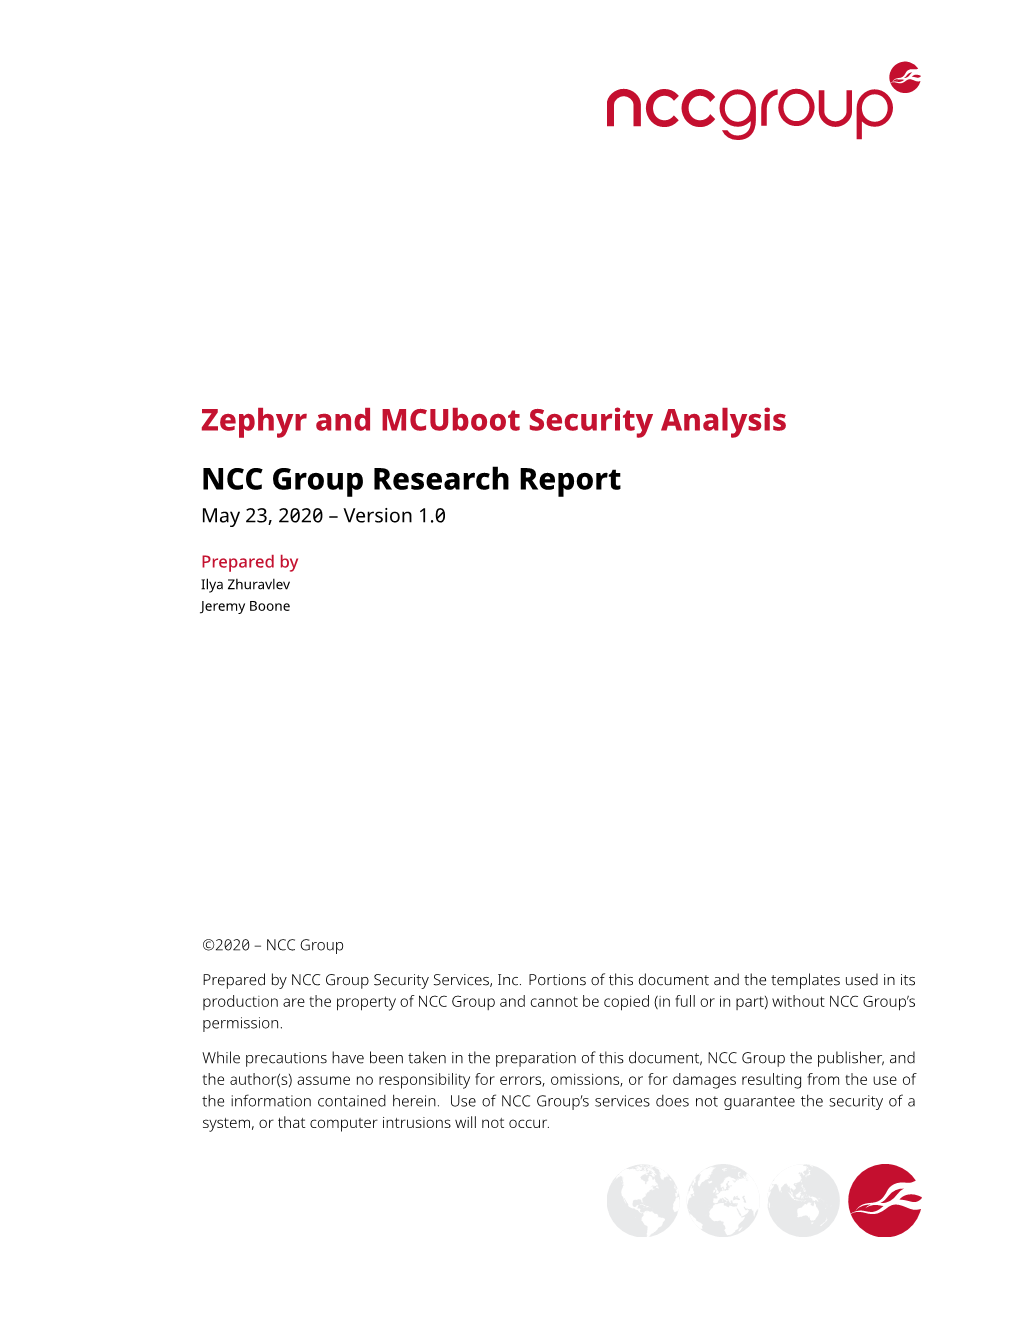 Zephyr and Mcuboot Security Analysis NCC Group Research Report May 23, 2020 – Version 1.0